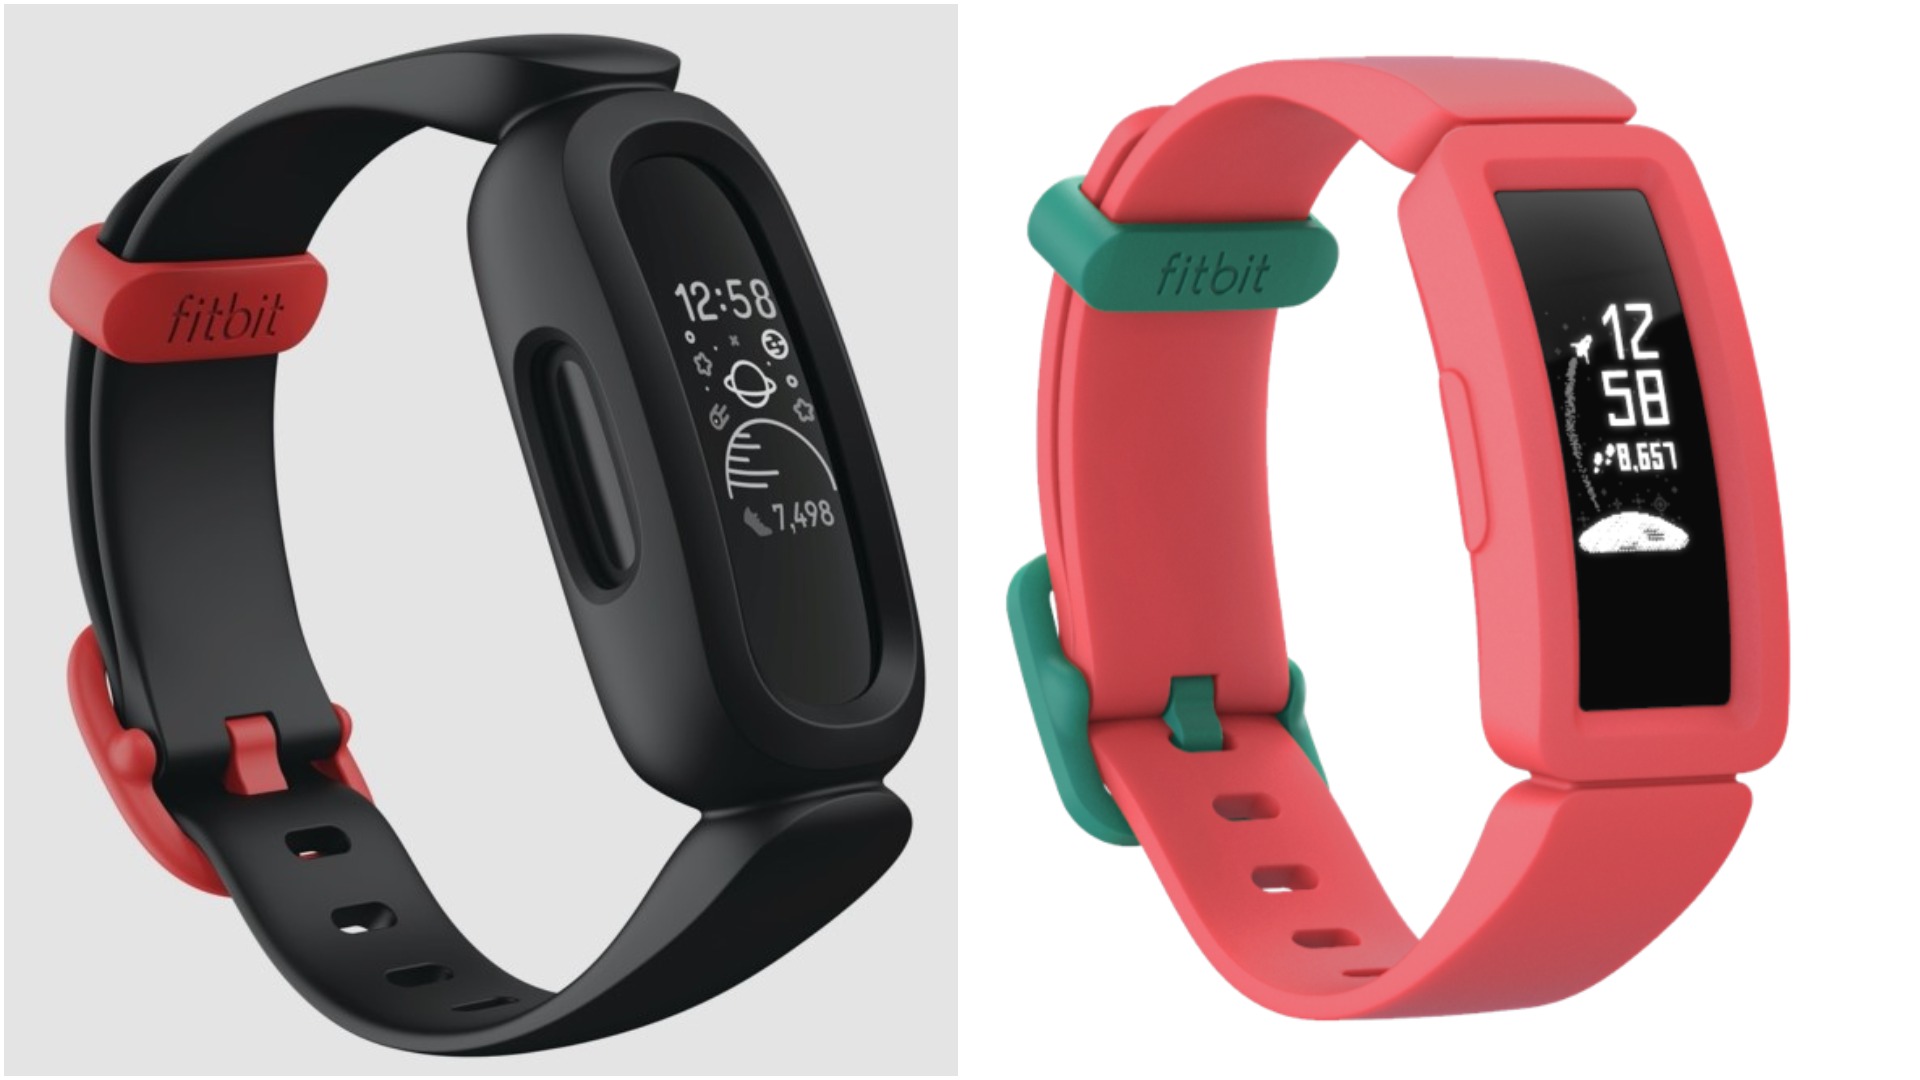 Fitbit Ace 3 vs Fitbit Ace 2: What's the difference? | Technology